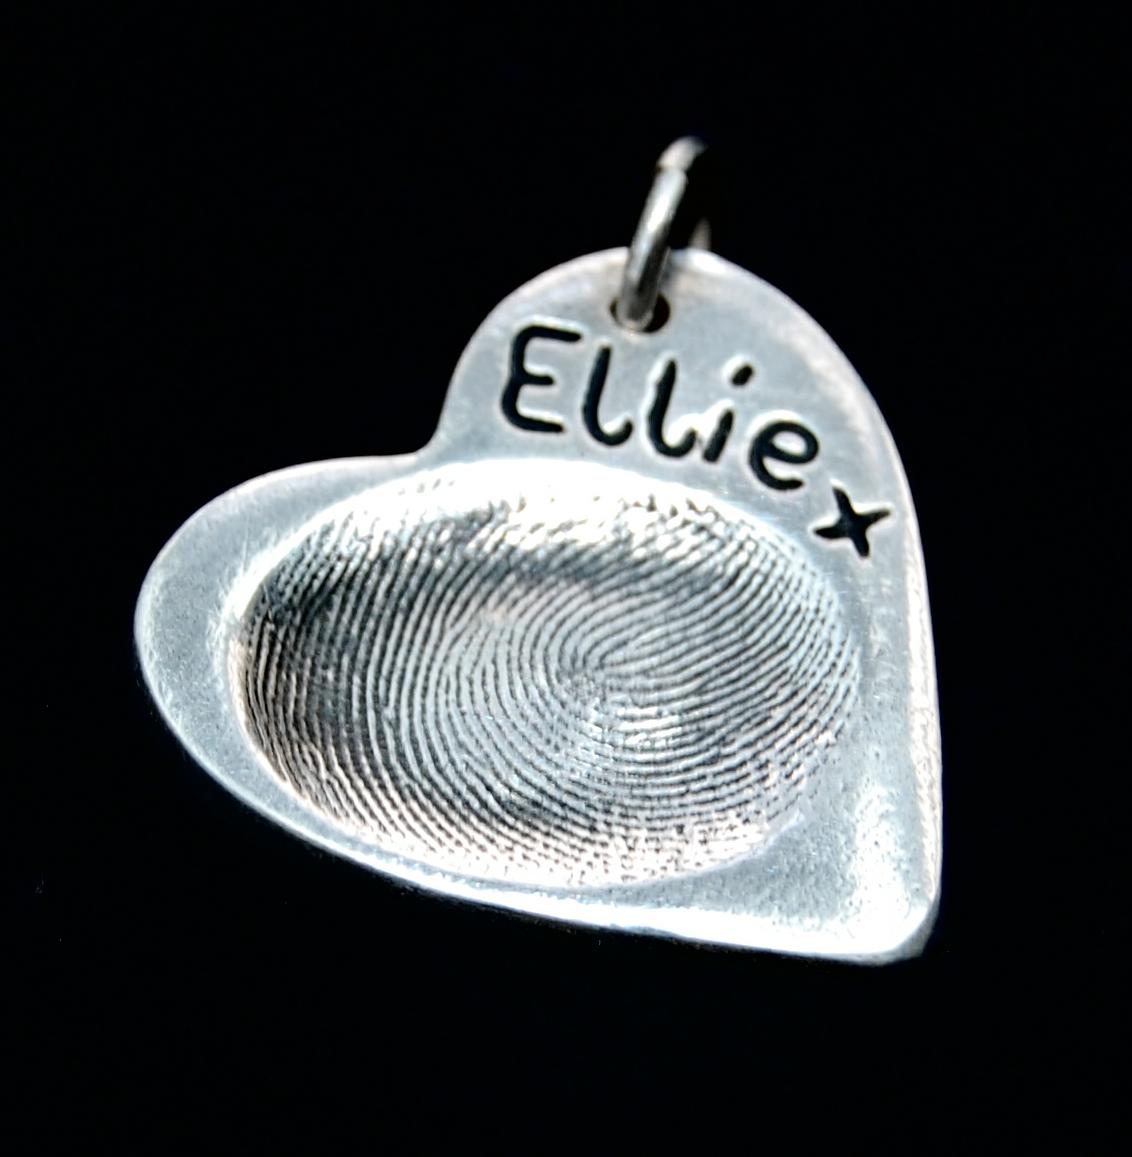 Regular heart shaped silver fingerprint charm with fingerprint and name inscribed on the front.